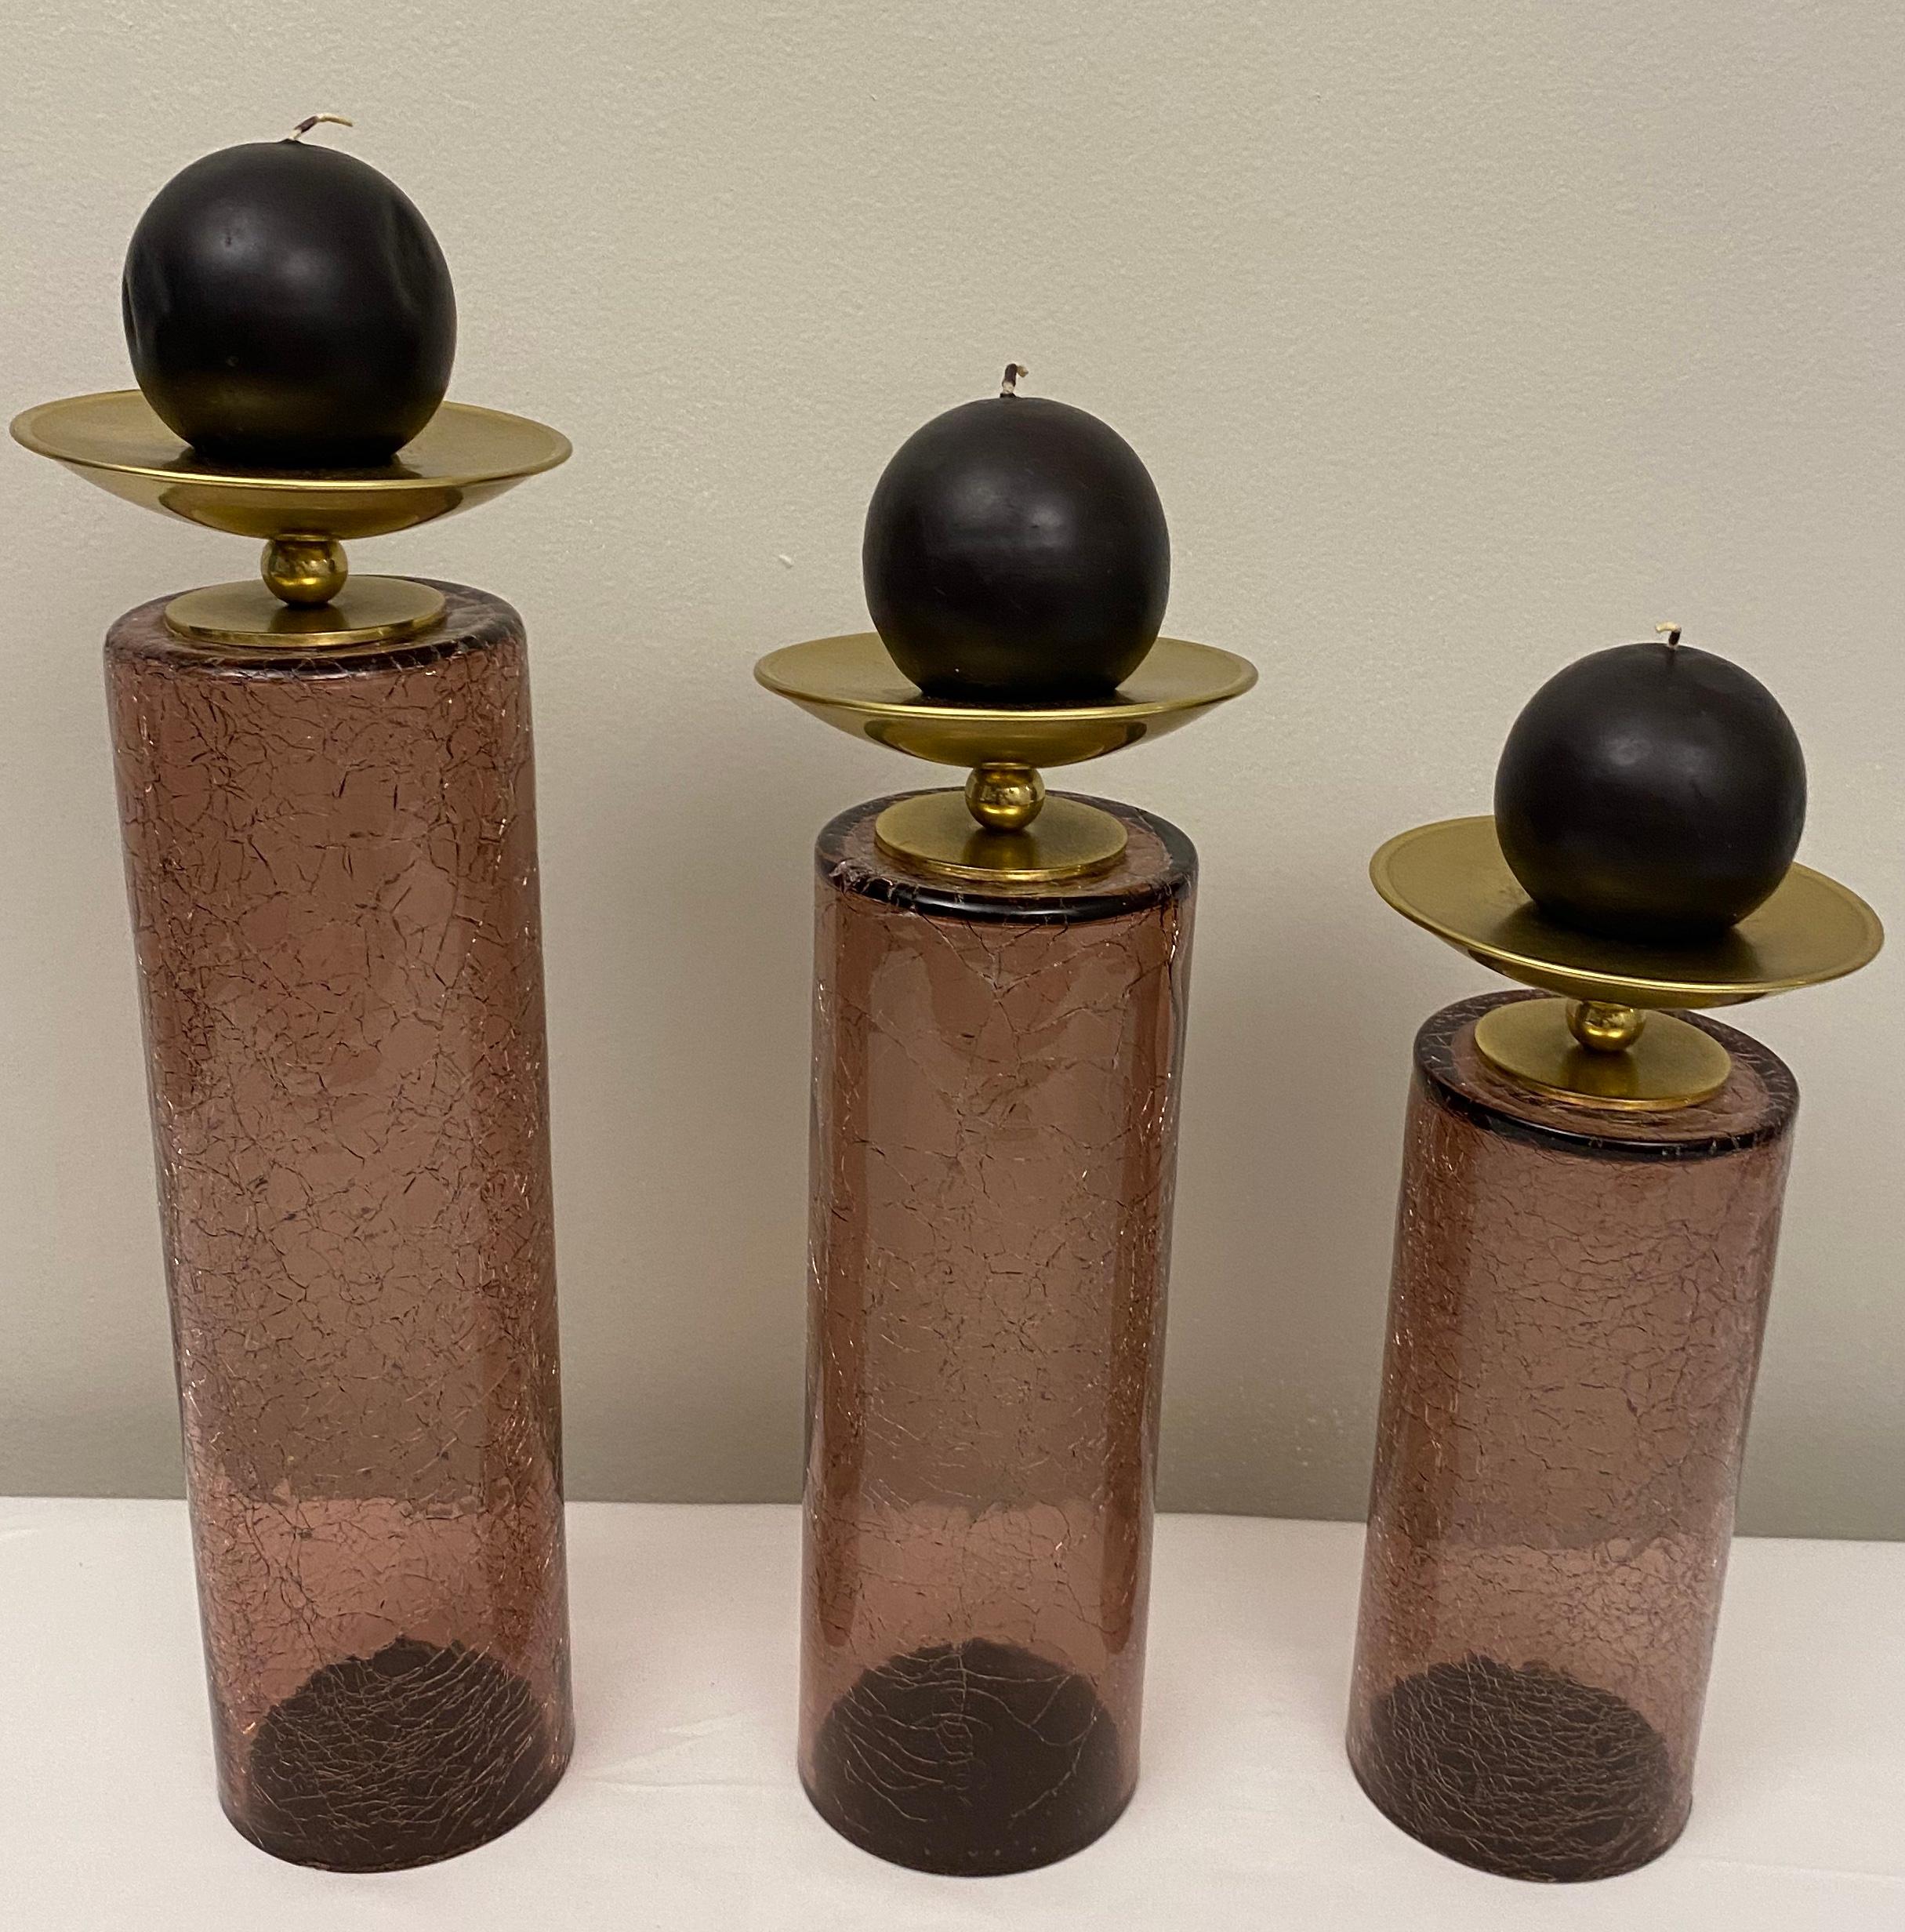 Striking set of 3 staggered candle holders, vintage American modernist glass and brass, circa 1970-79. These interestingly designed candle holders are in remarkable vintage condition. 

Dimensions with candles: 
Smallest candle holder: 12 1/4